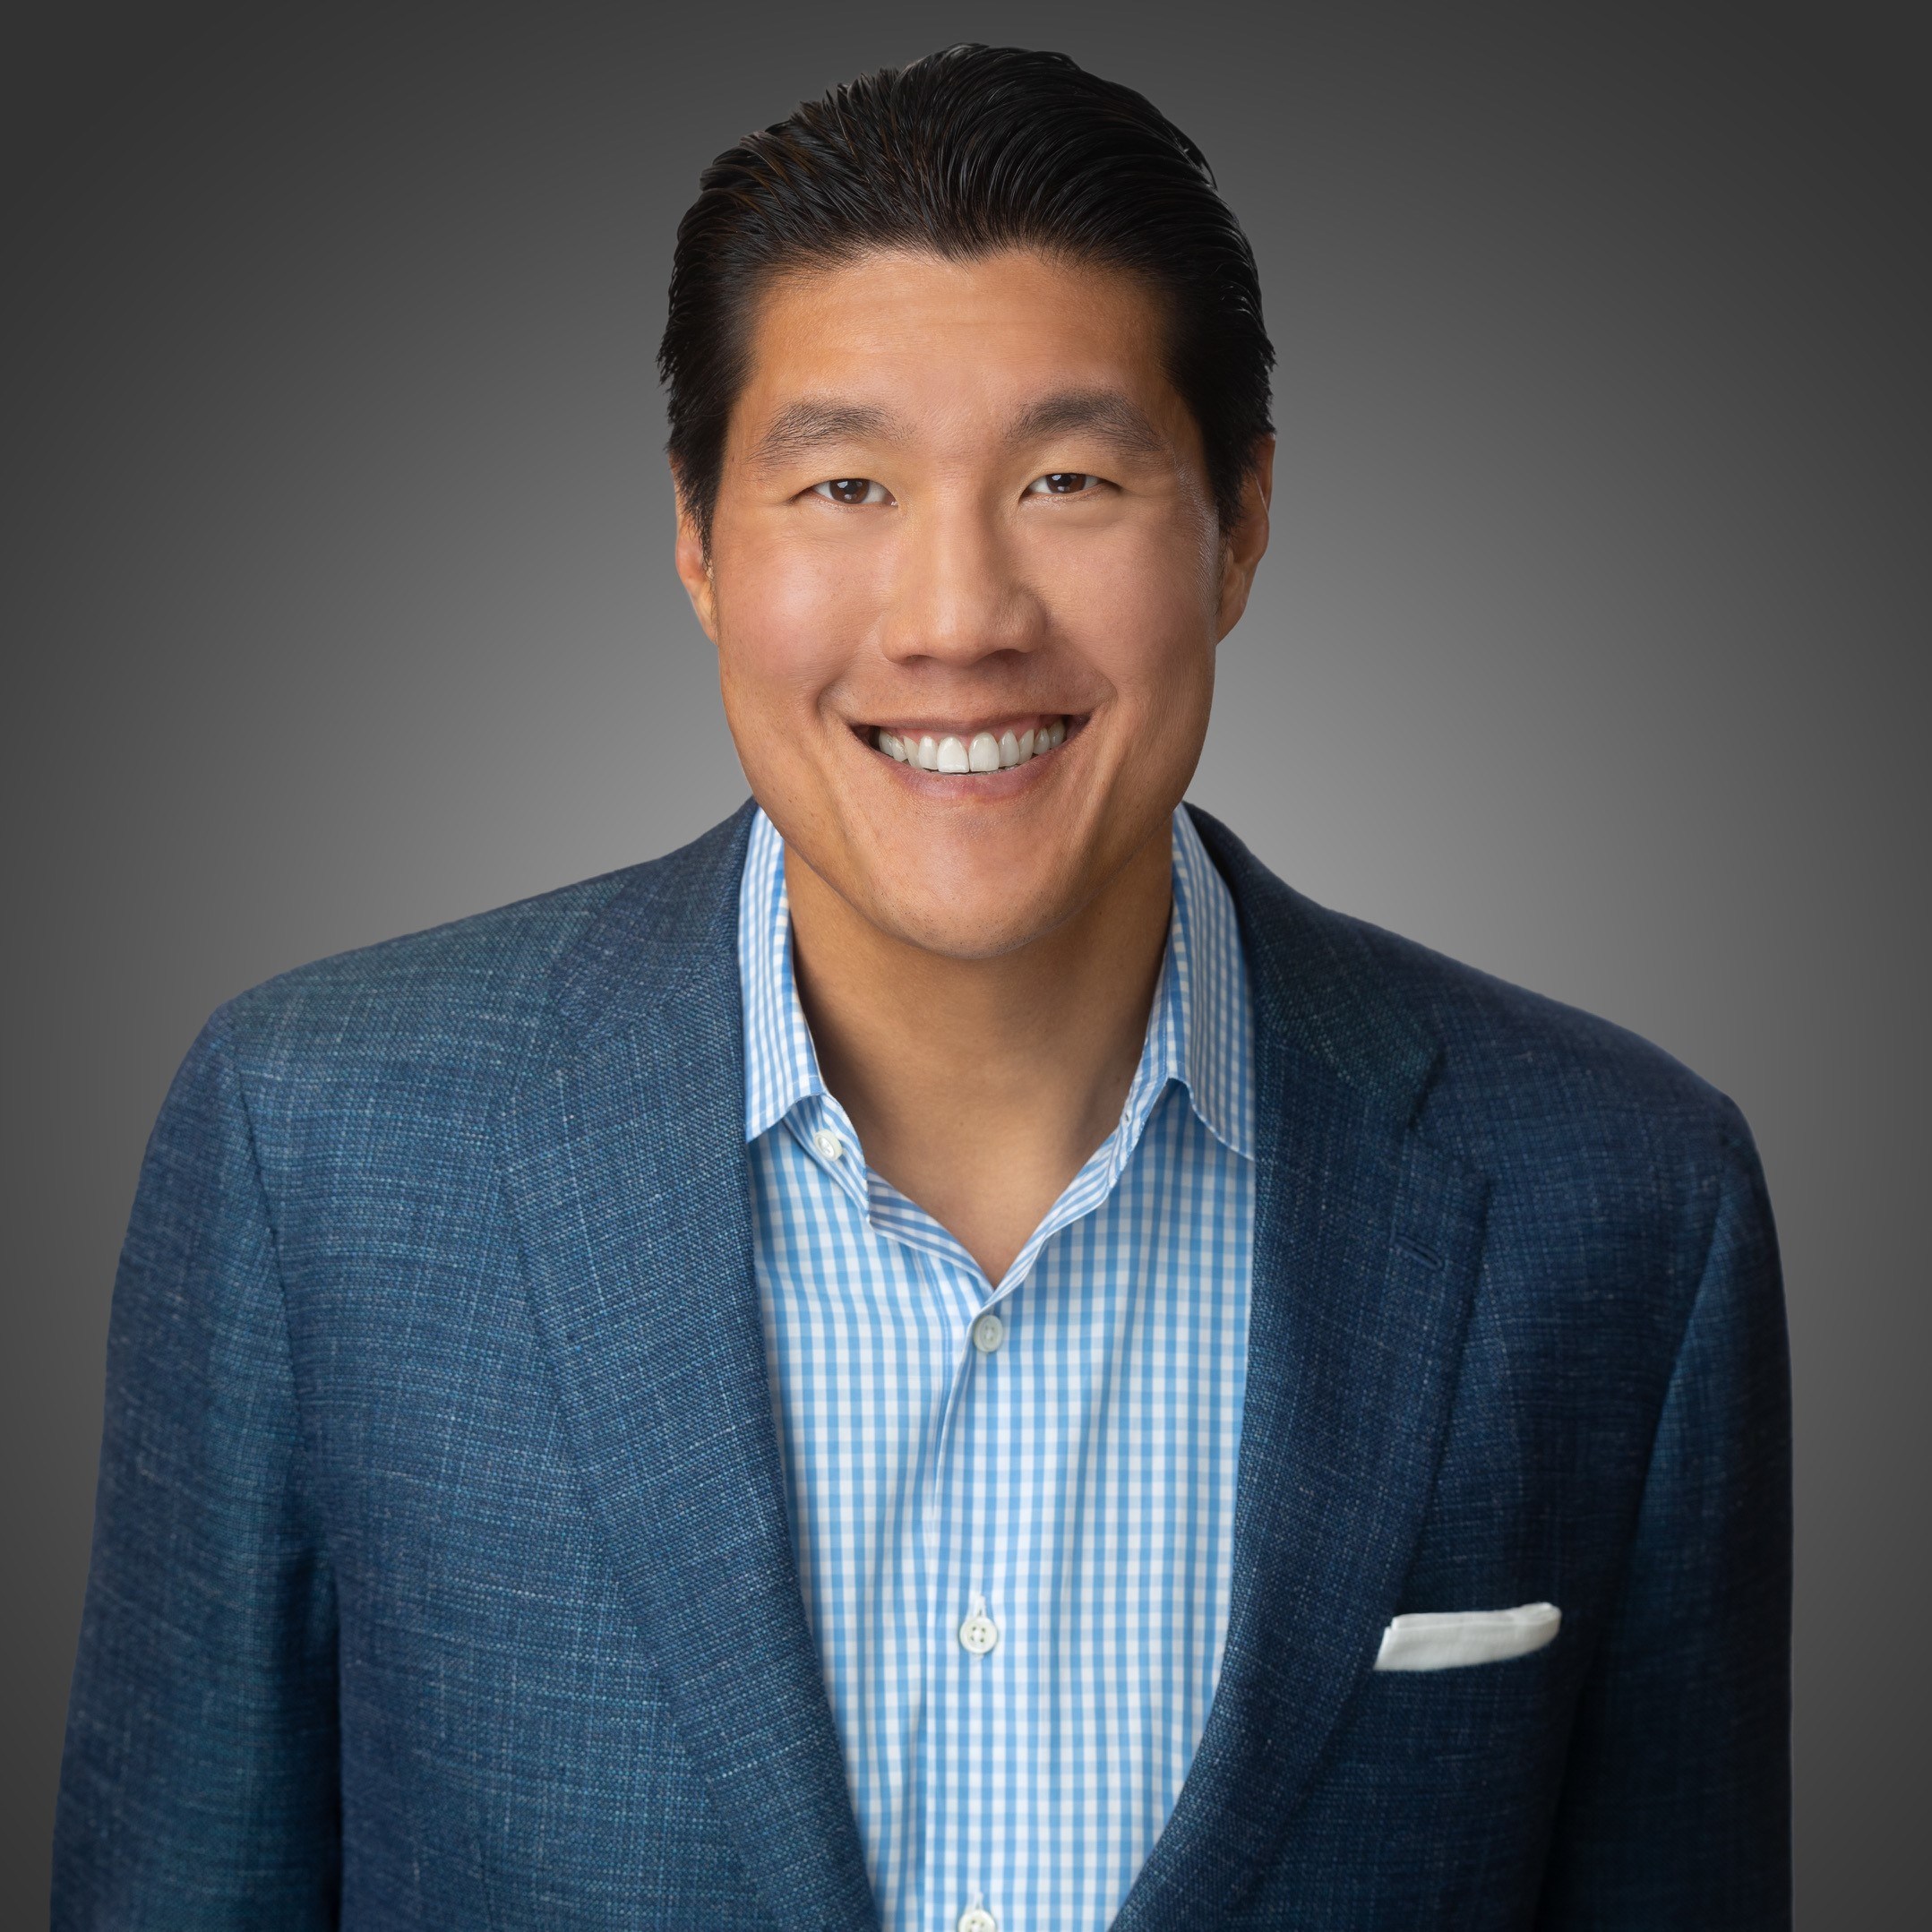 ChenMed CEO Christopher Chen, MD To Speak at National ...